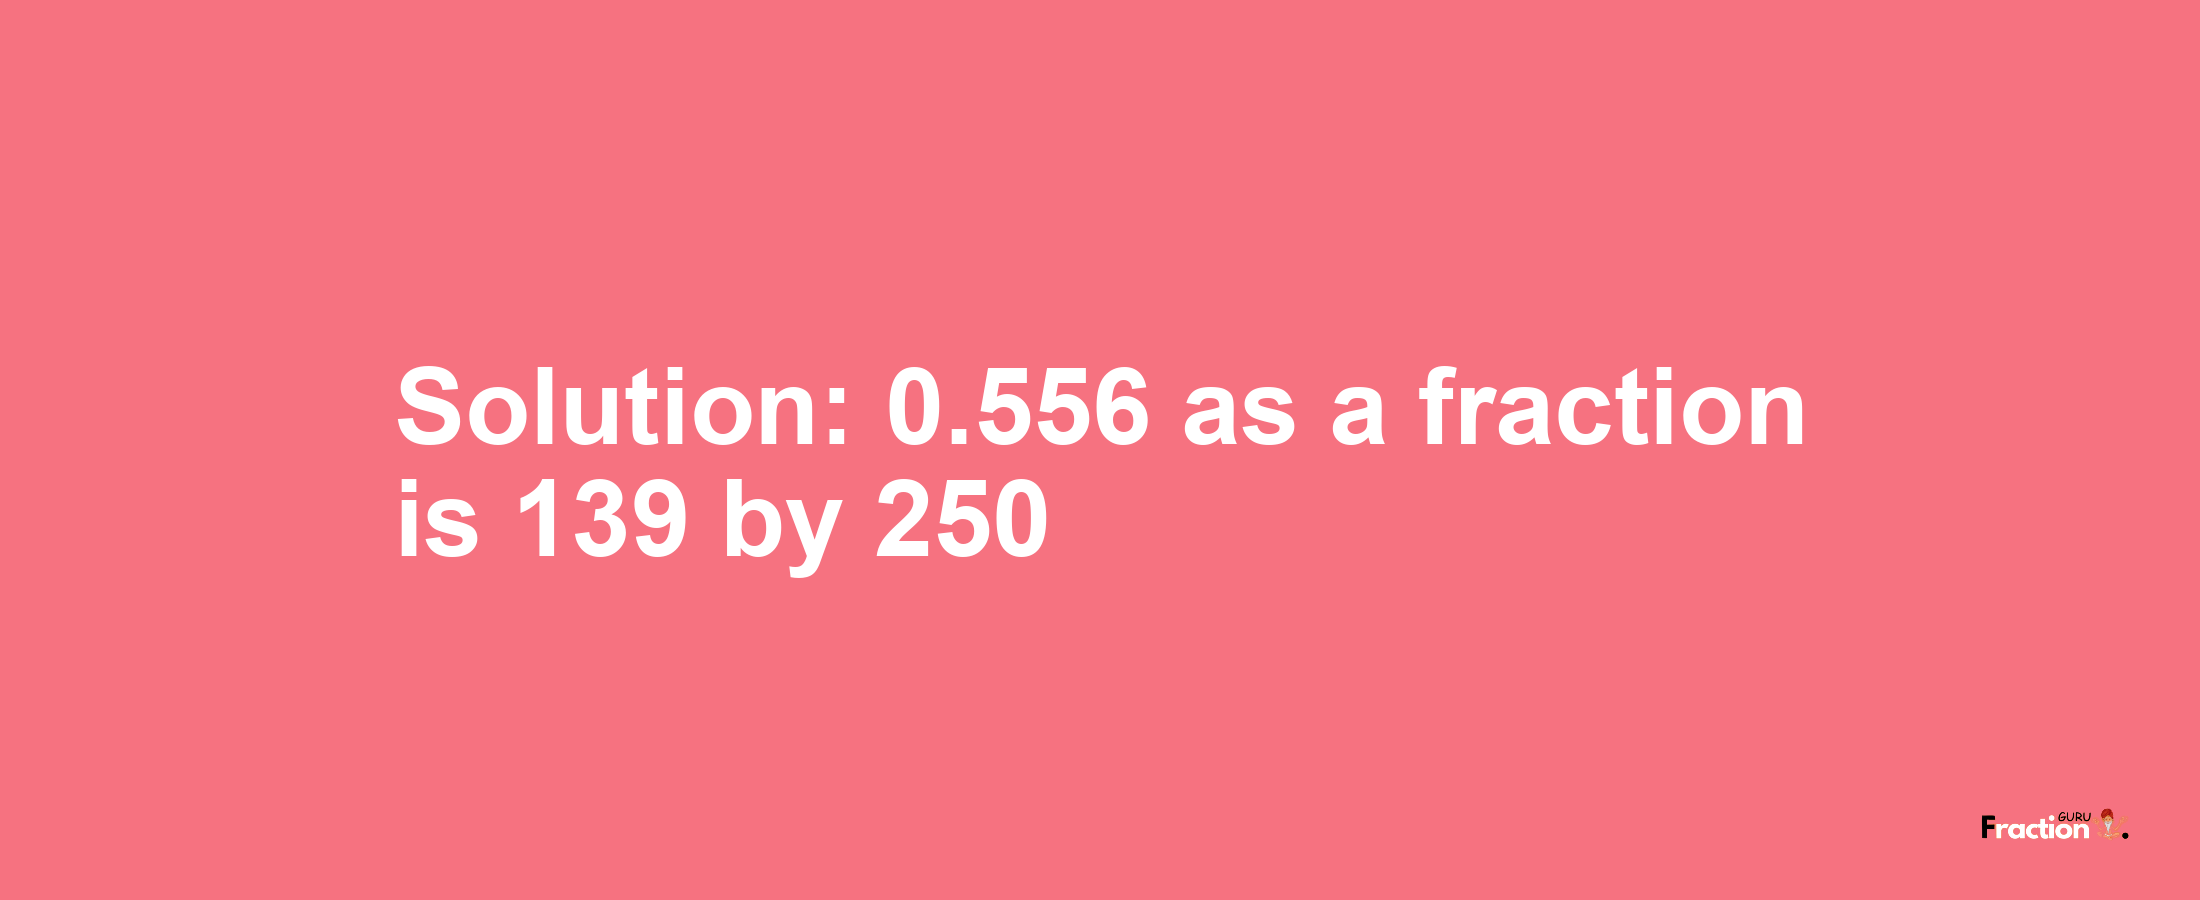 Solution:0.556 as a fraction is 139/250